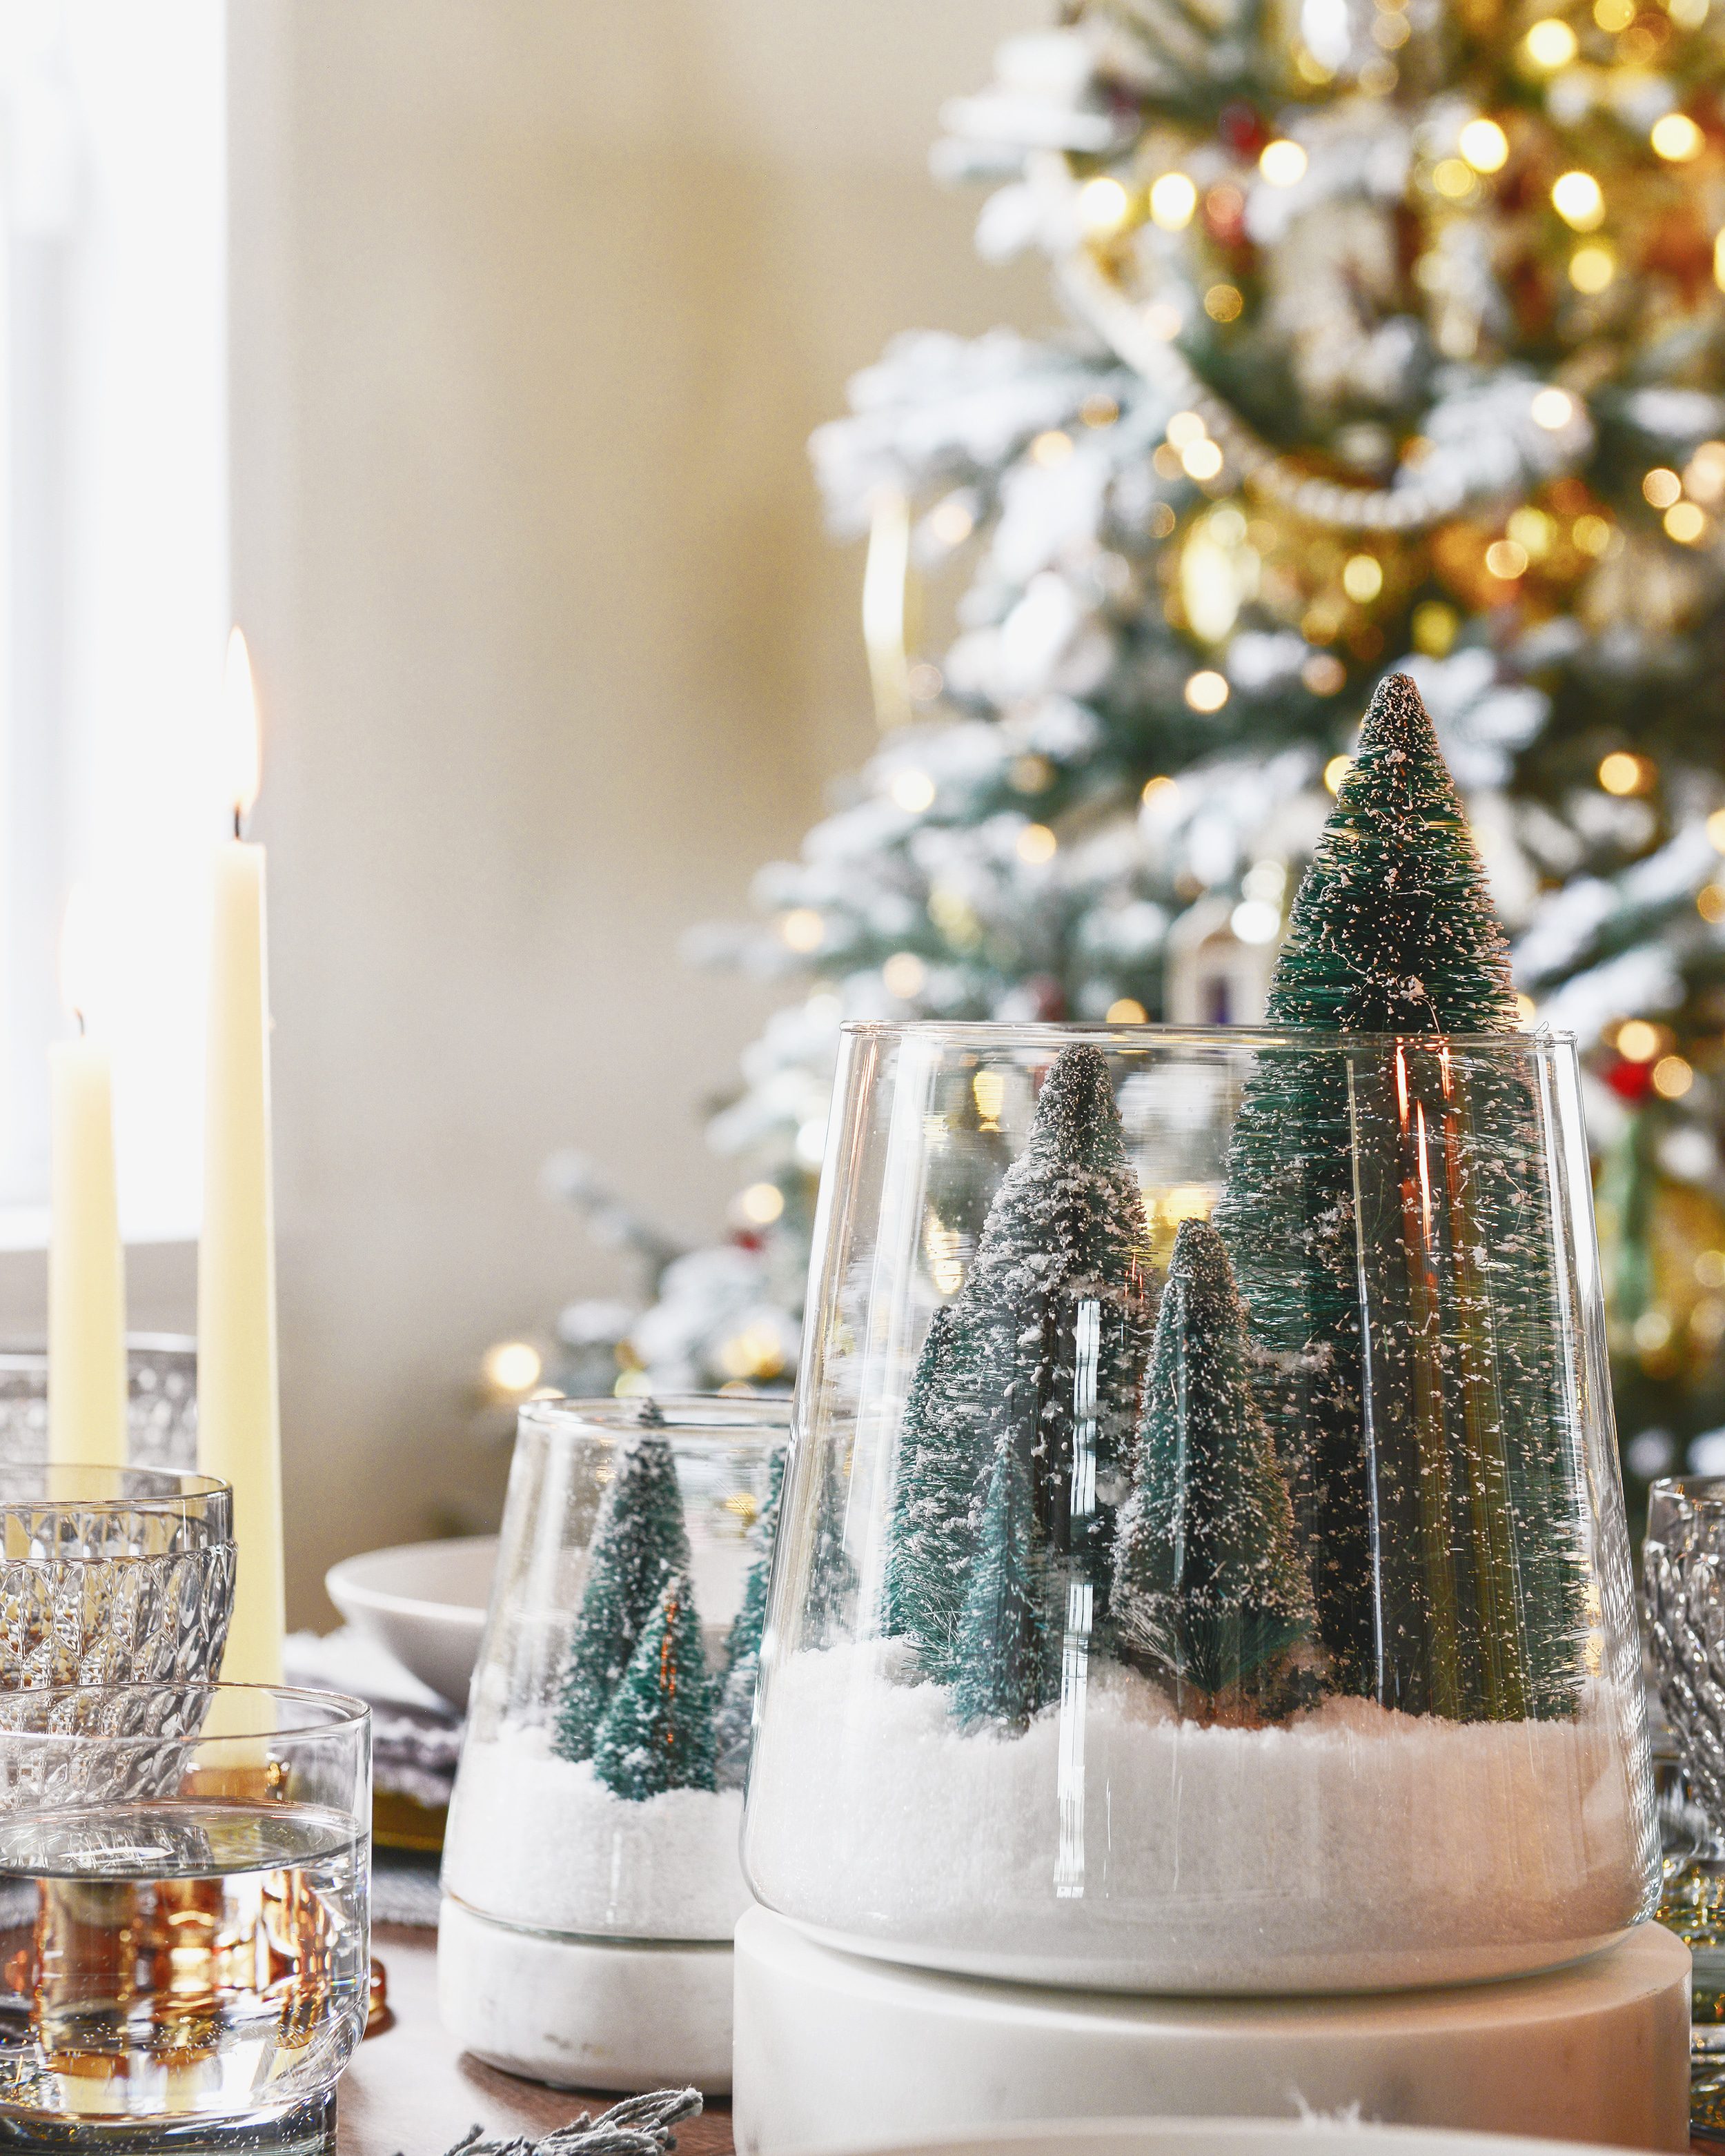 A close up of a DIY table centerpiece made from flocked trees and a hurricane glass | This holiday season, consider simplifying your table setting with these 5 fresh styling tips! | via Yellow Brick Home